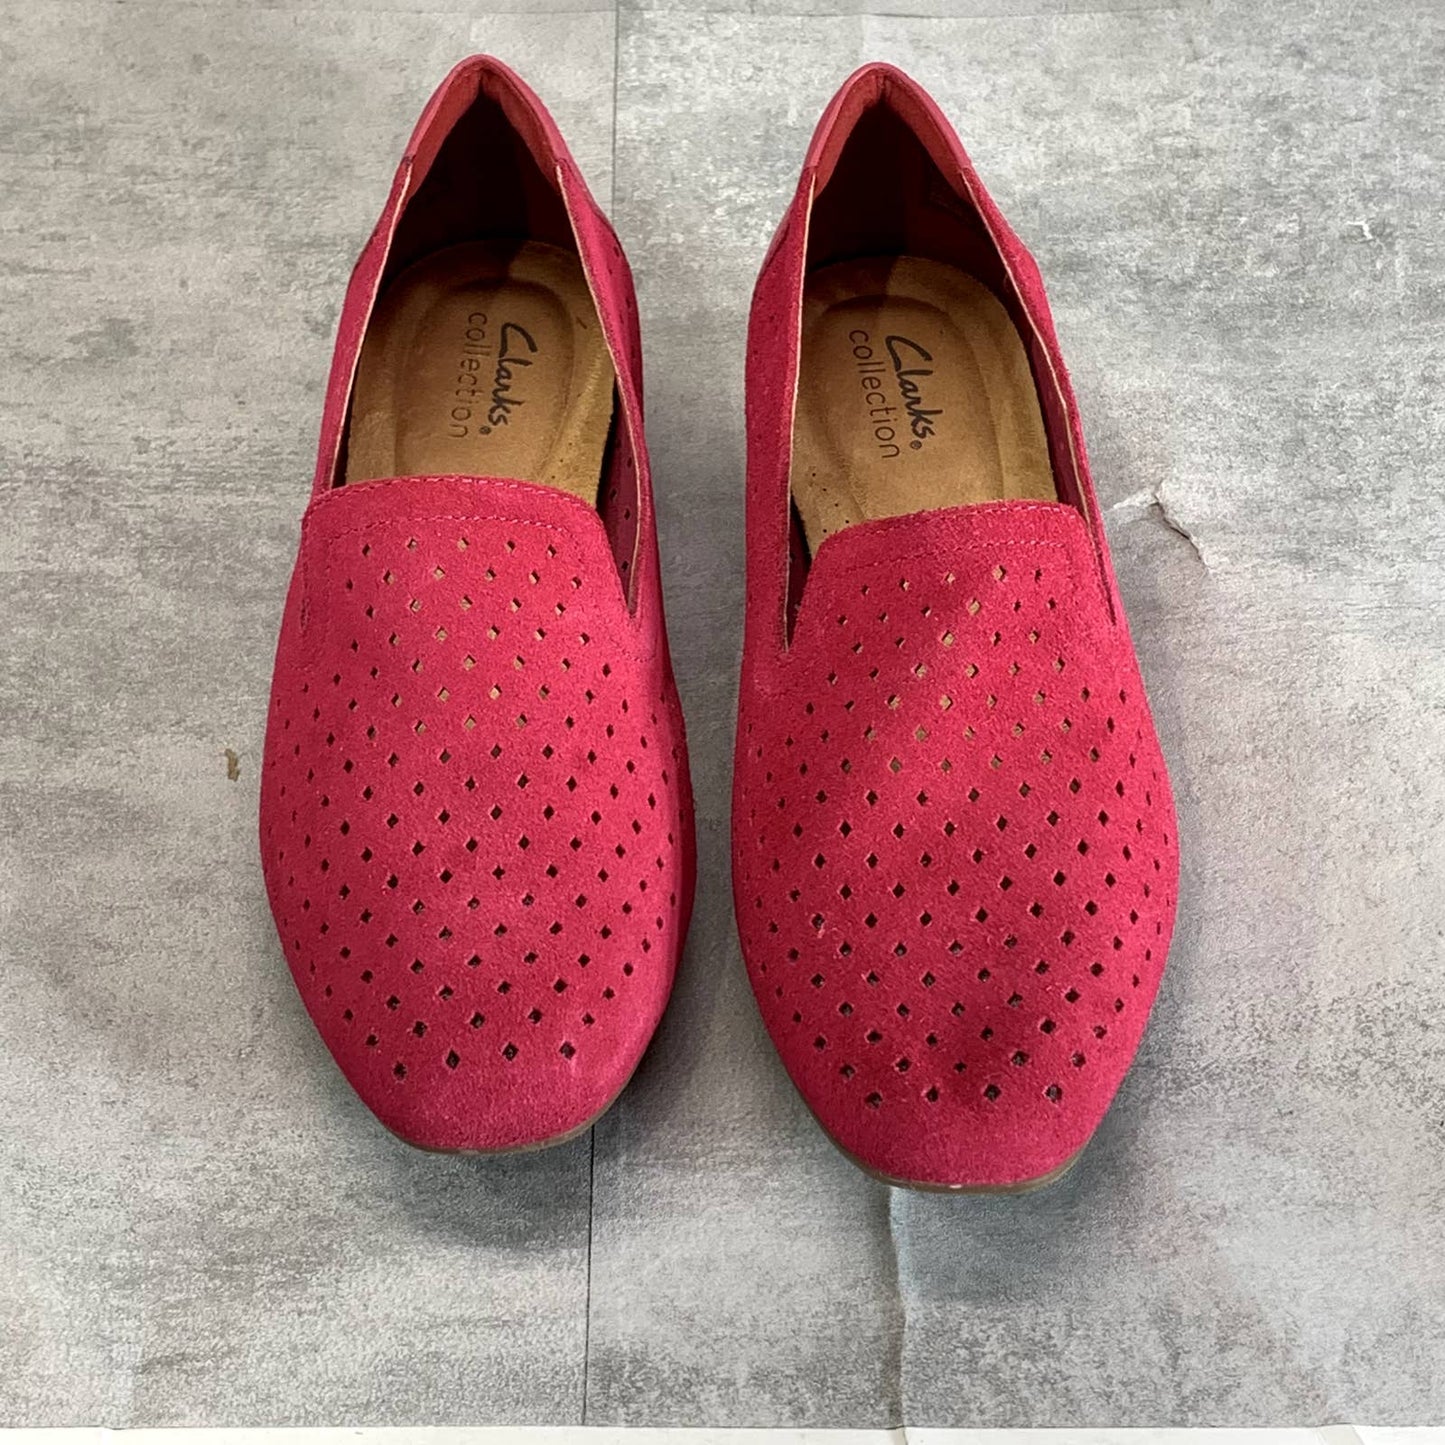 CLARKS COLLECTION Women's Fuchsia Suede Juliet Hayes Perforated Loafers SZ 8